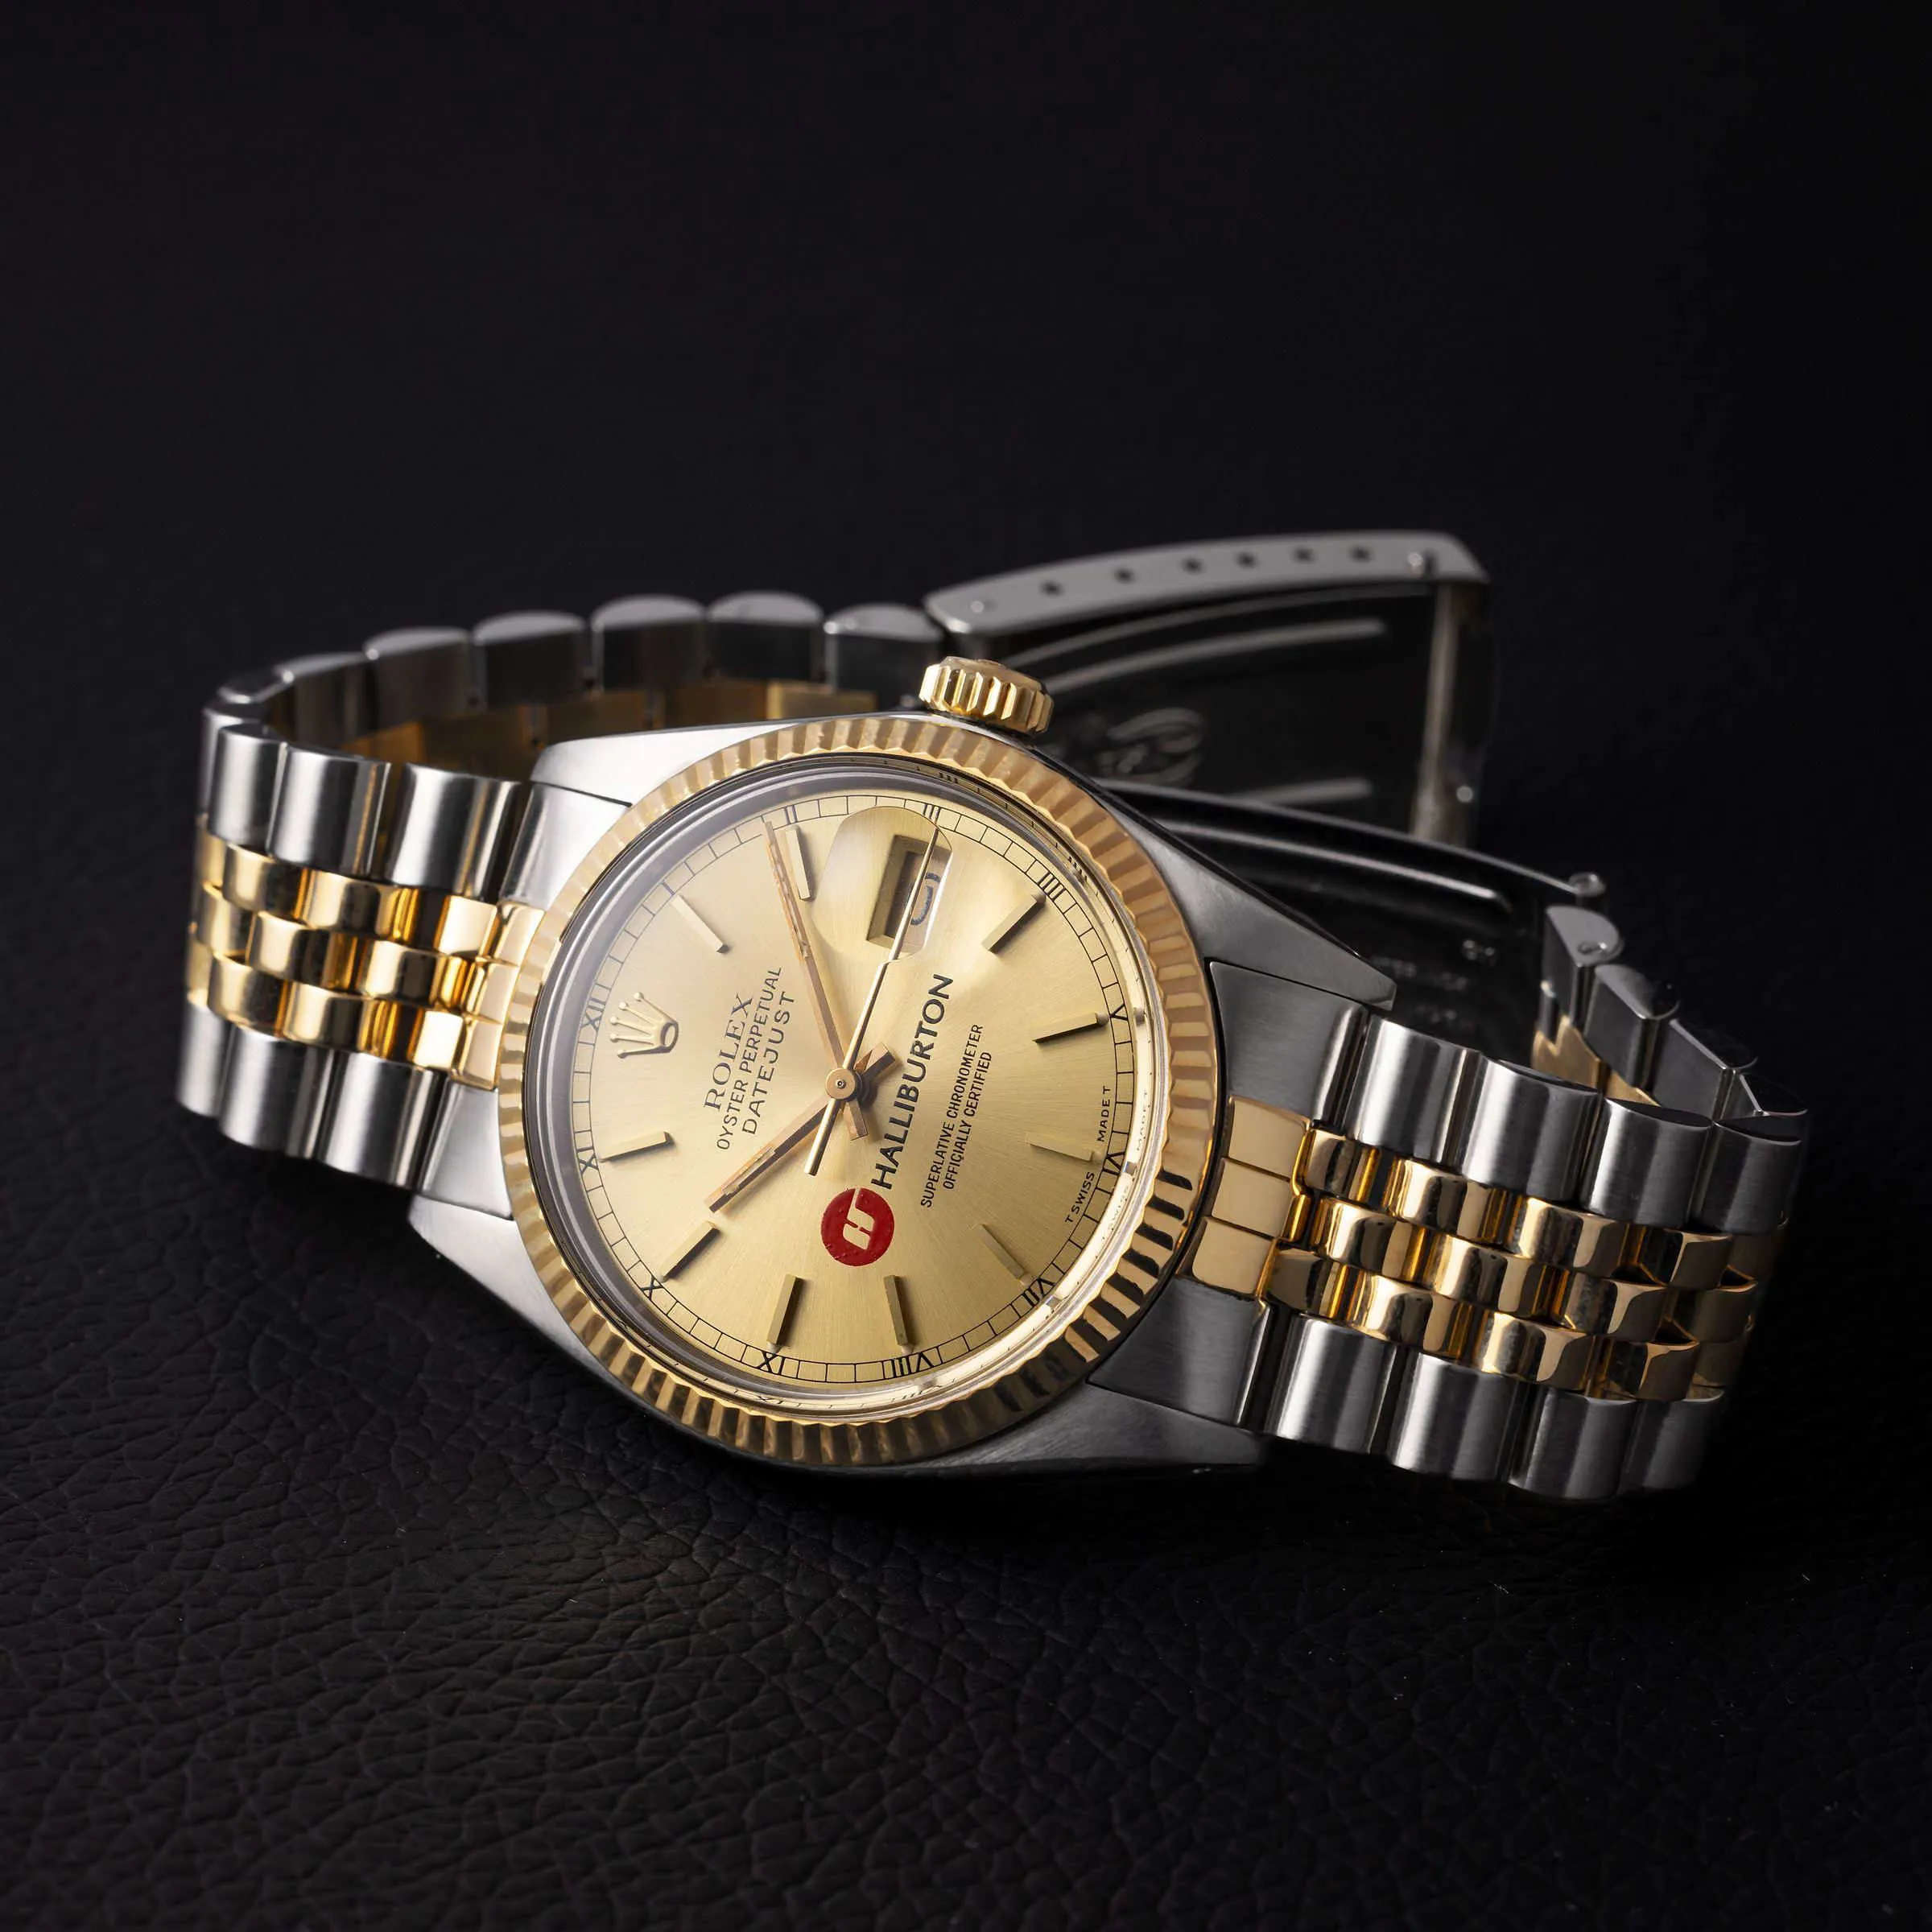 Rolex Datejust 36 16013 36mm Yellow gold and stainless steel Champagne 5